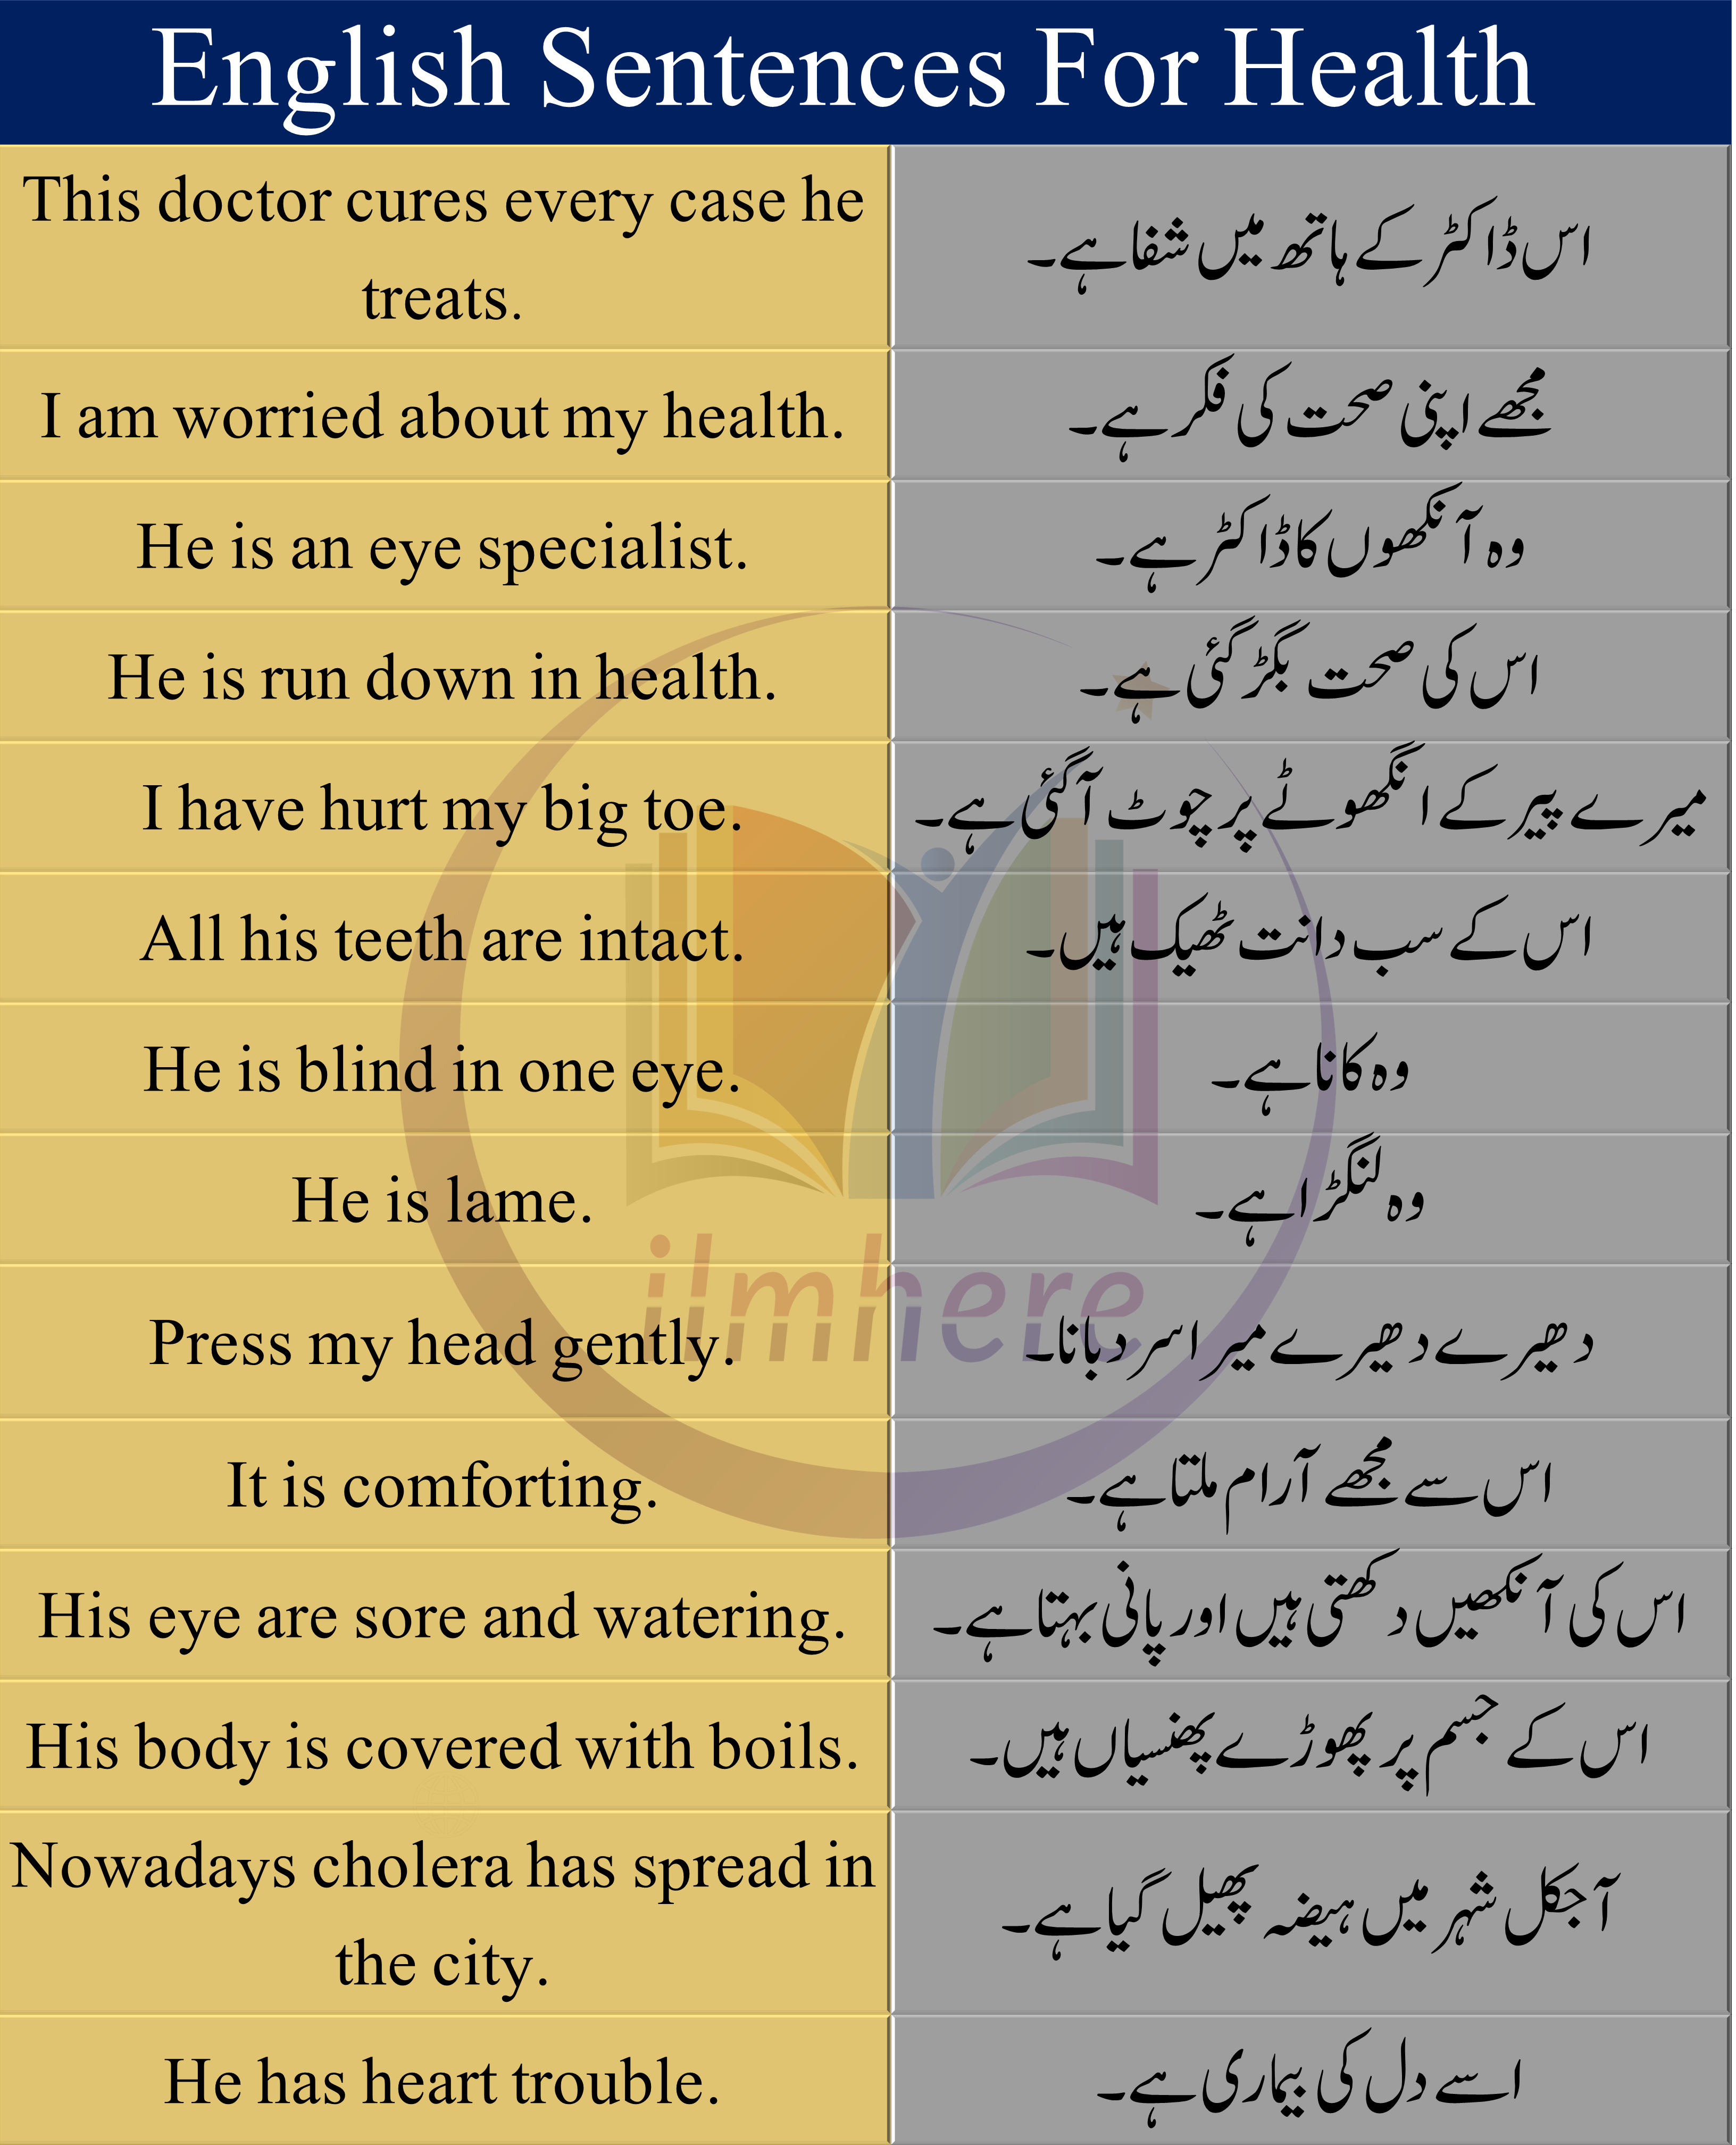 Sentences About Health In English And Urdu/Hindi